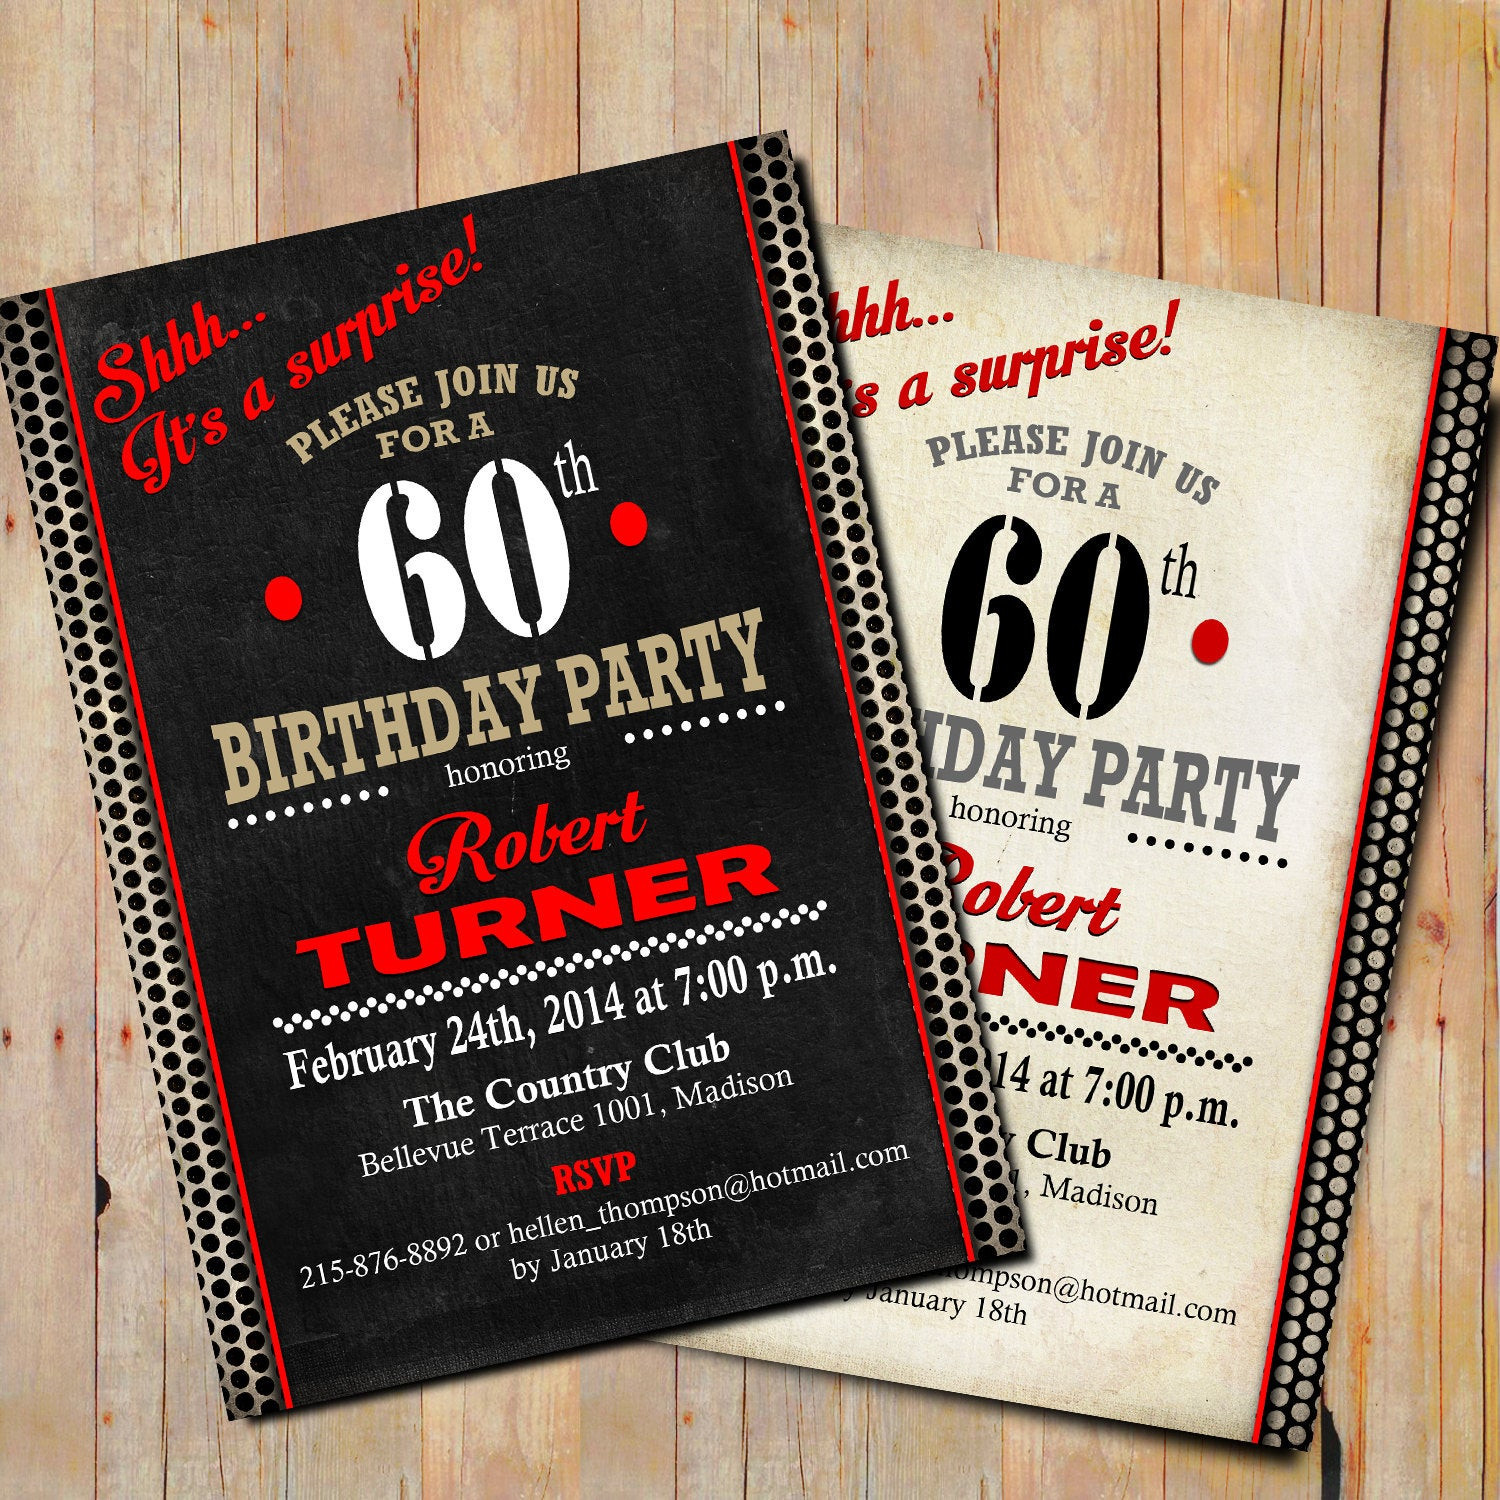 Surprise 60th Birthday Party Invitations
 Surprise 60th Birthday Invitation Any Age Black White Red